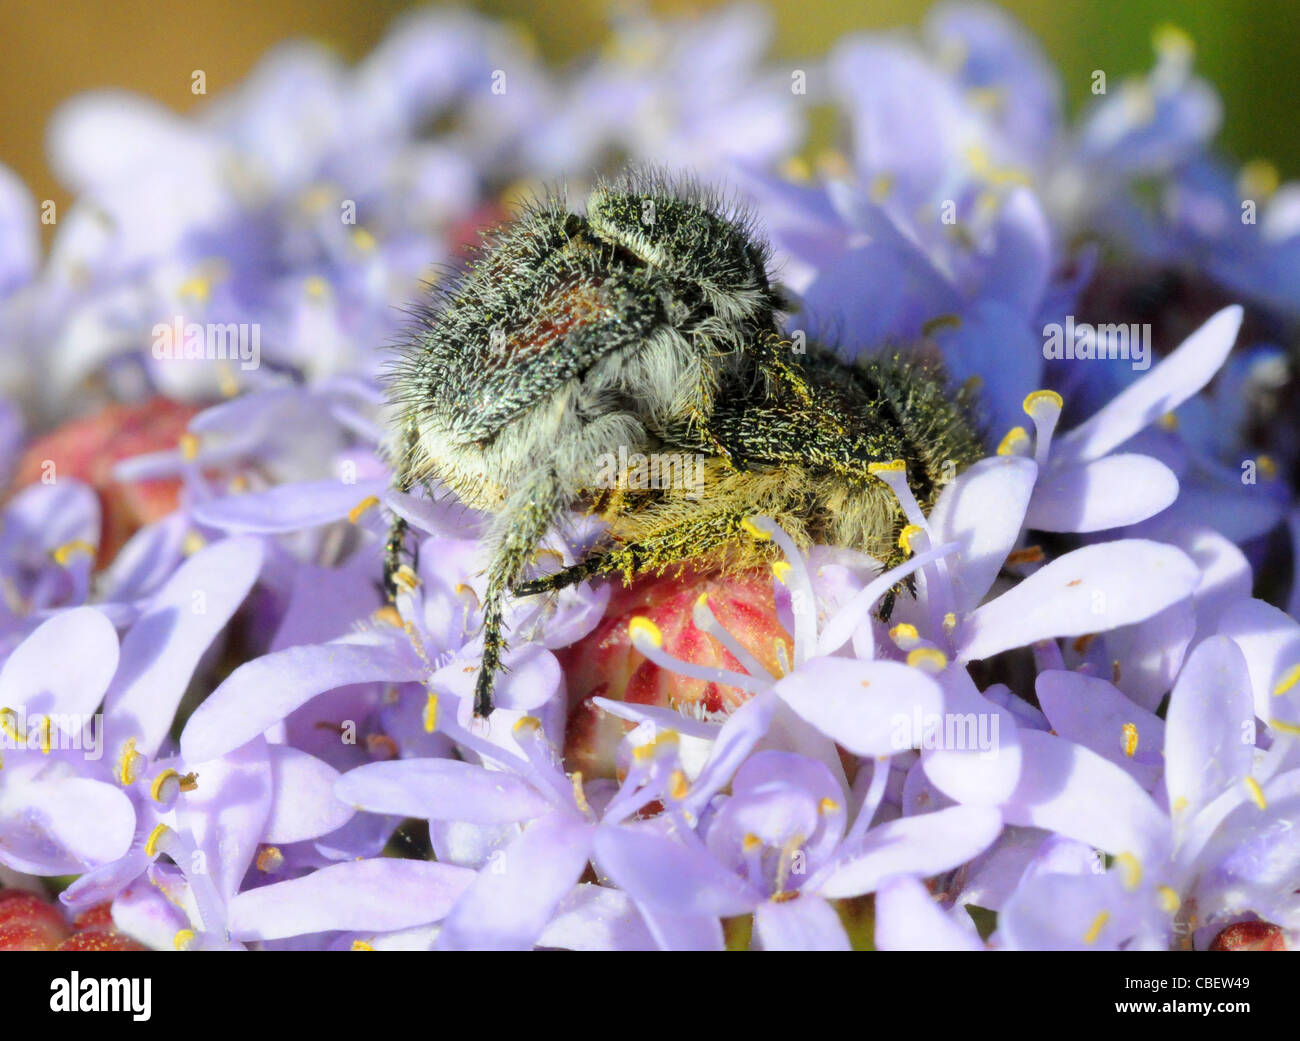 Close up of mating Monkey beetles on a blue flower head Stock Photo